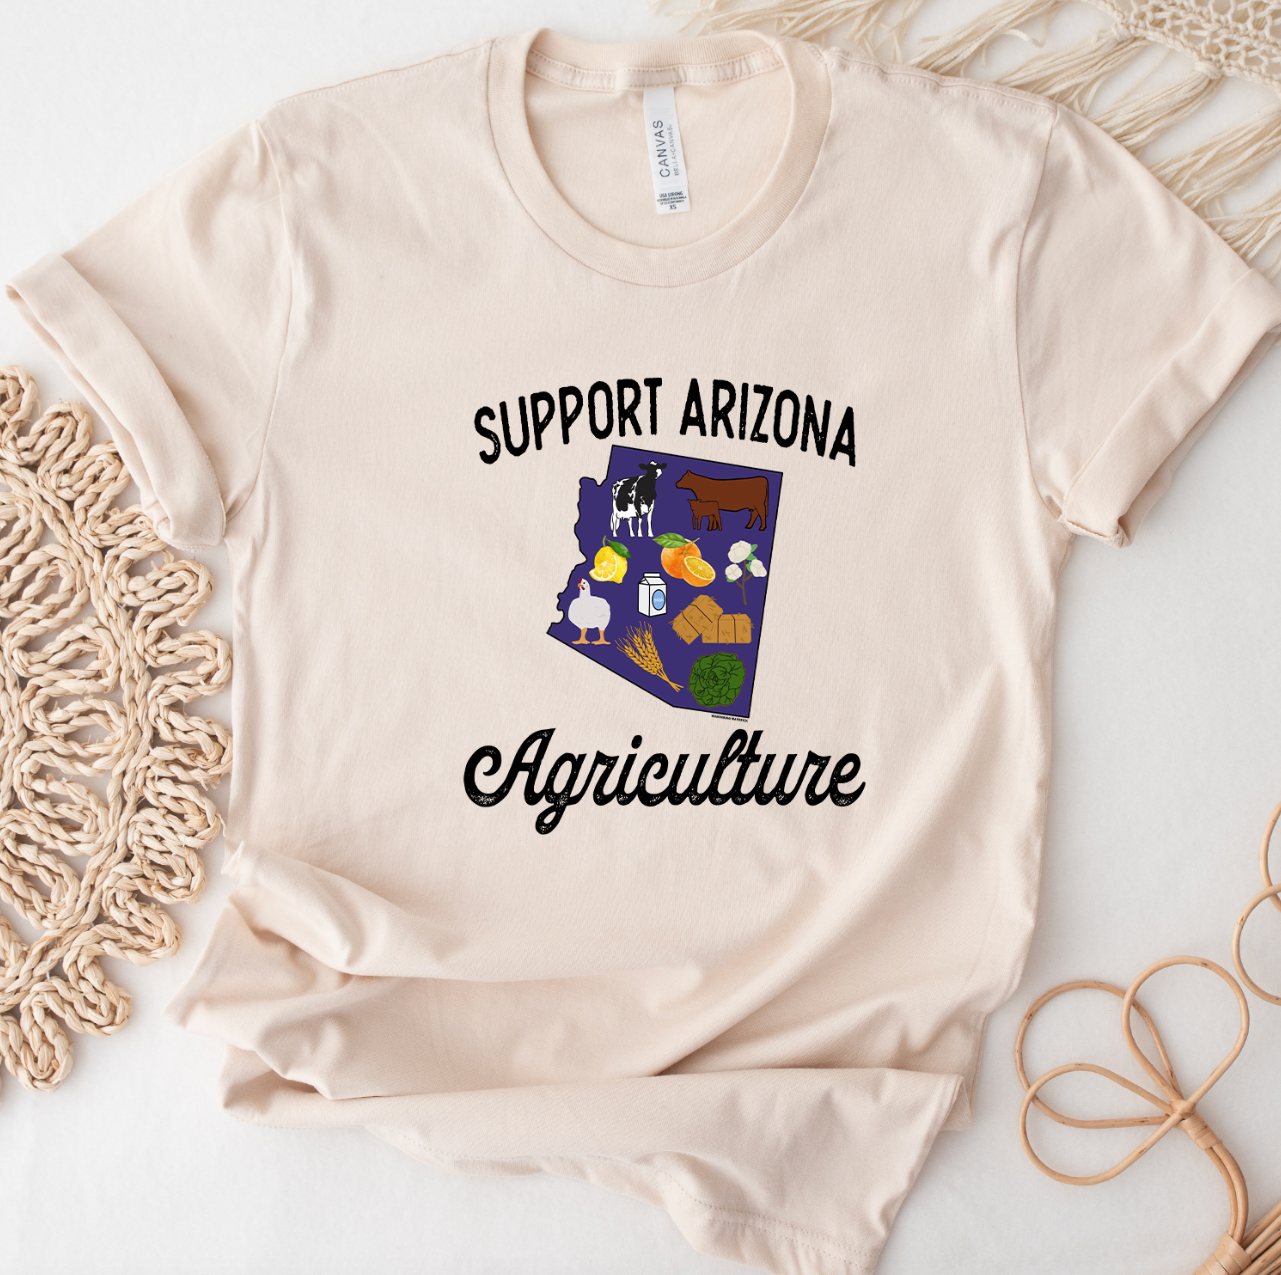 Support Arizona Agriculture T-Shirt (XS-4XL) - Multiple Colors!